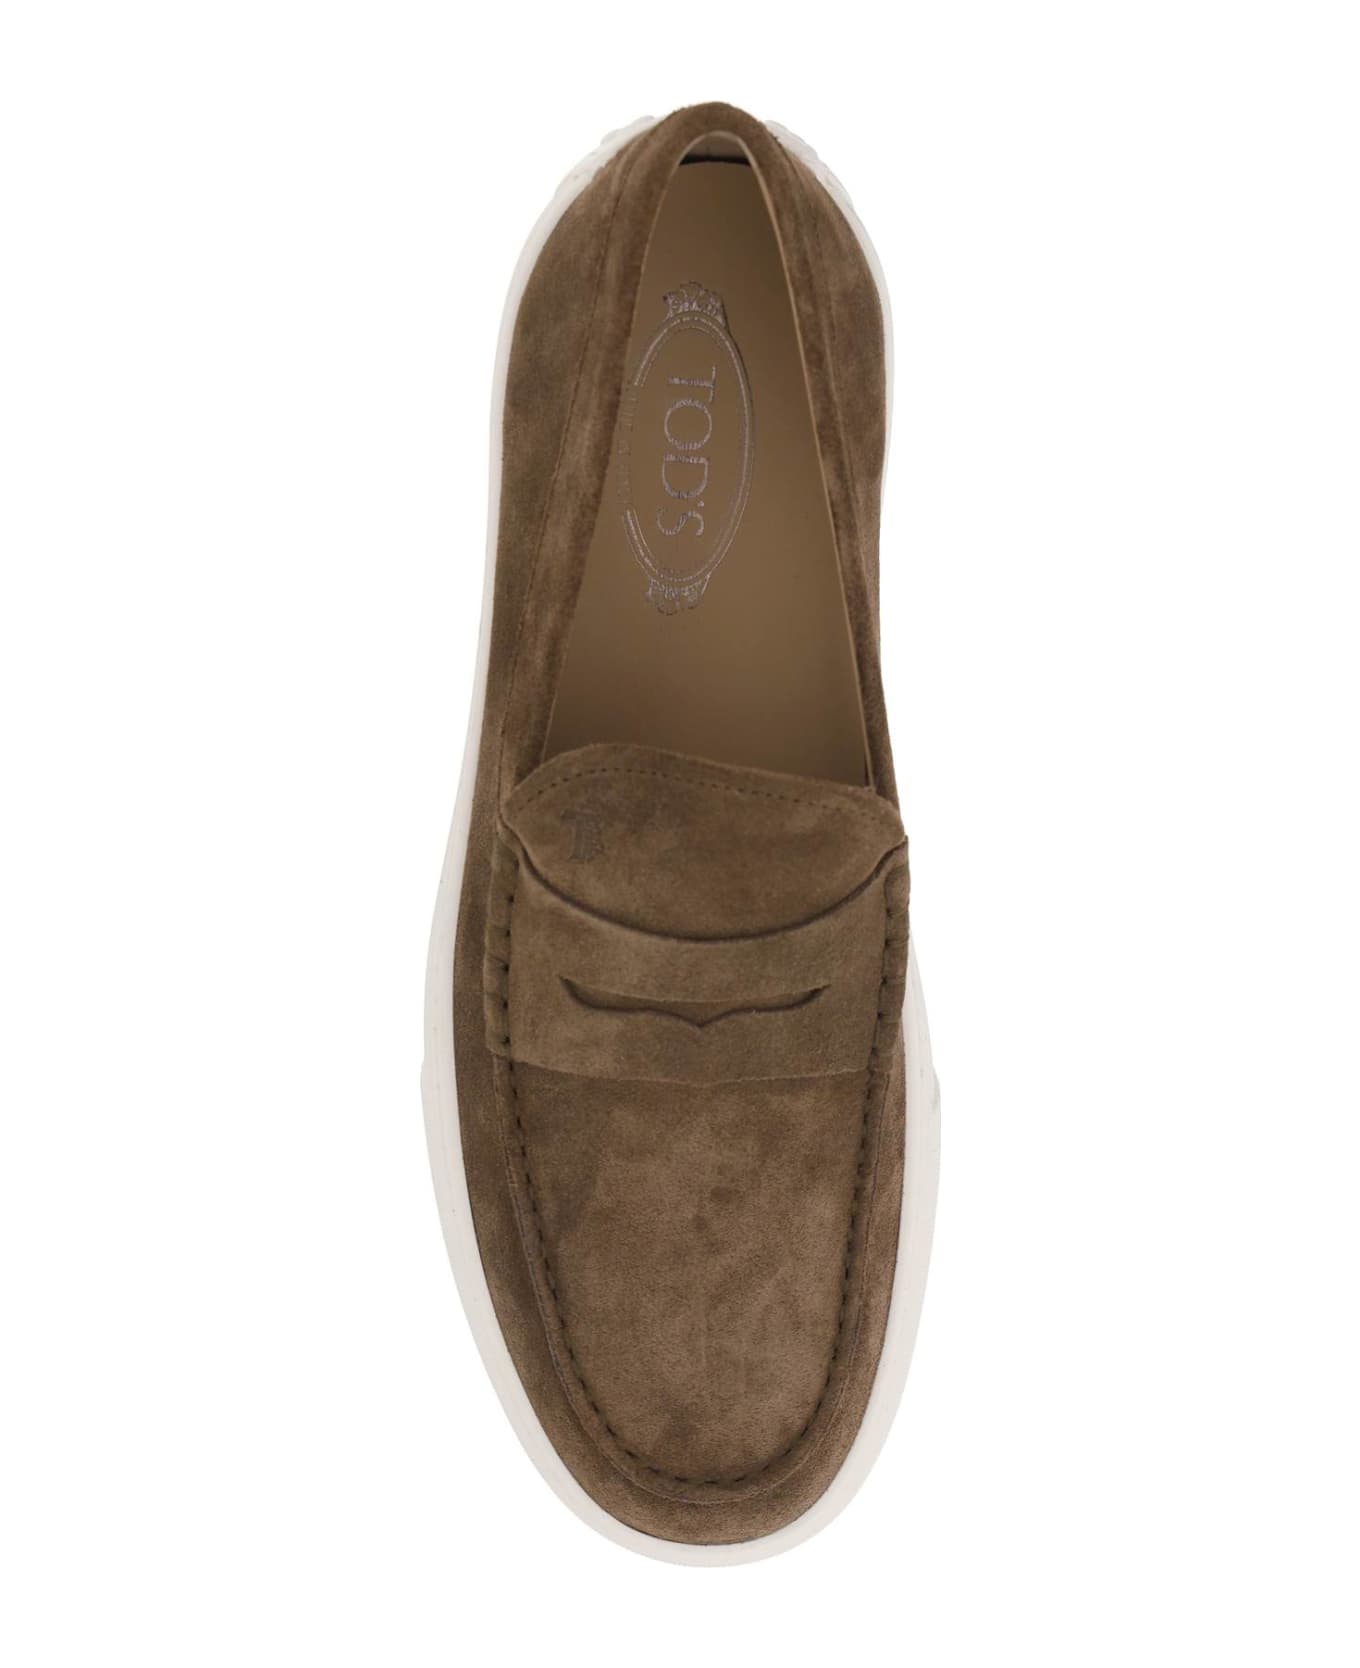 Tod's Loafers - NOCE CHIARO (Brown)